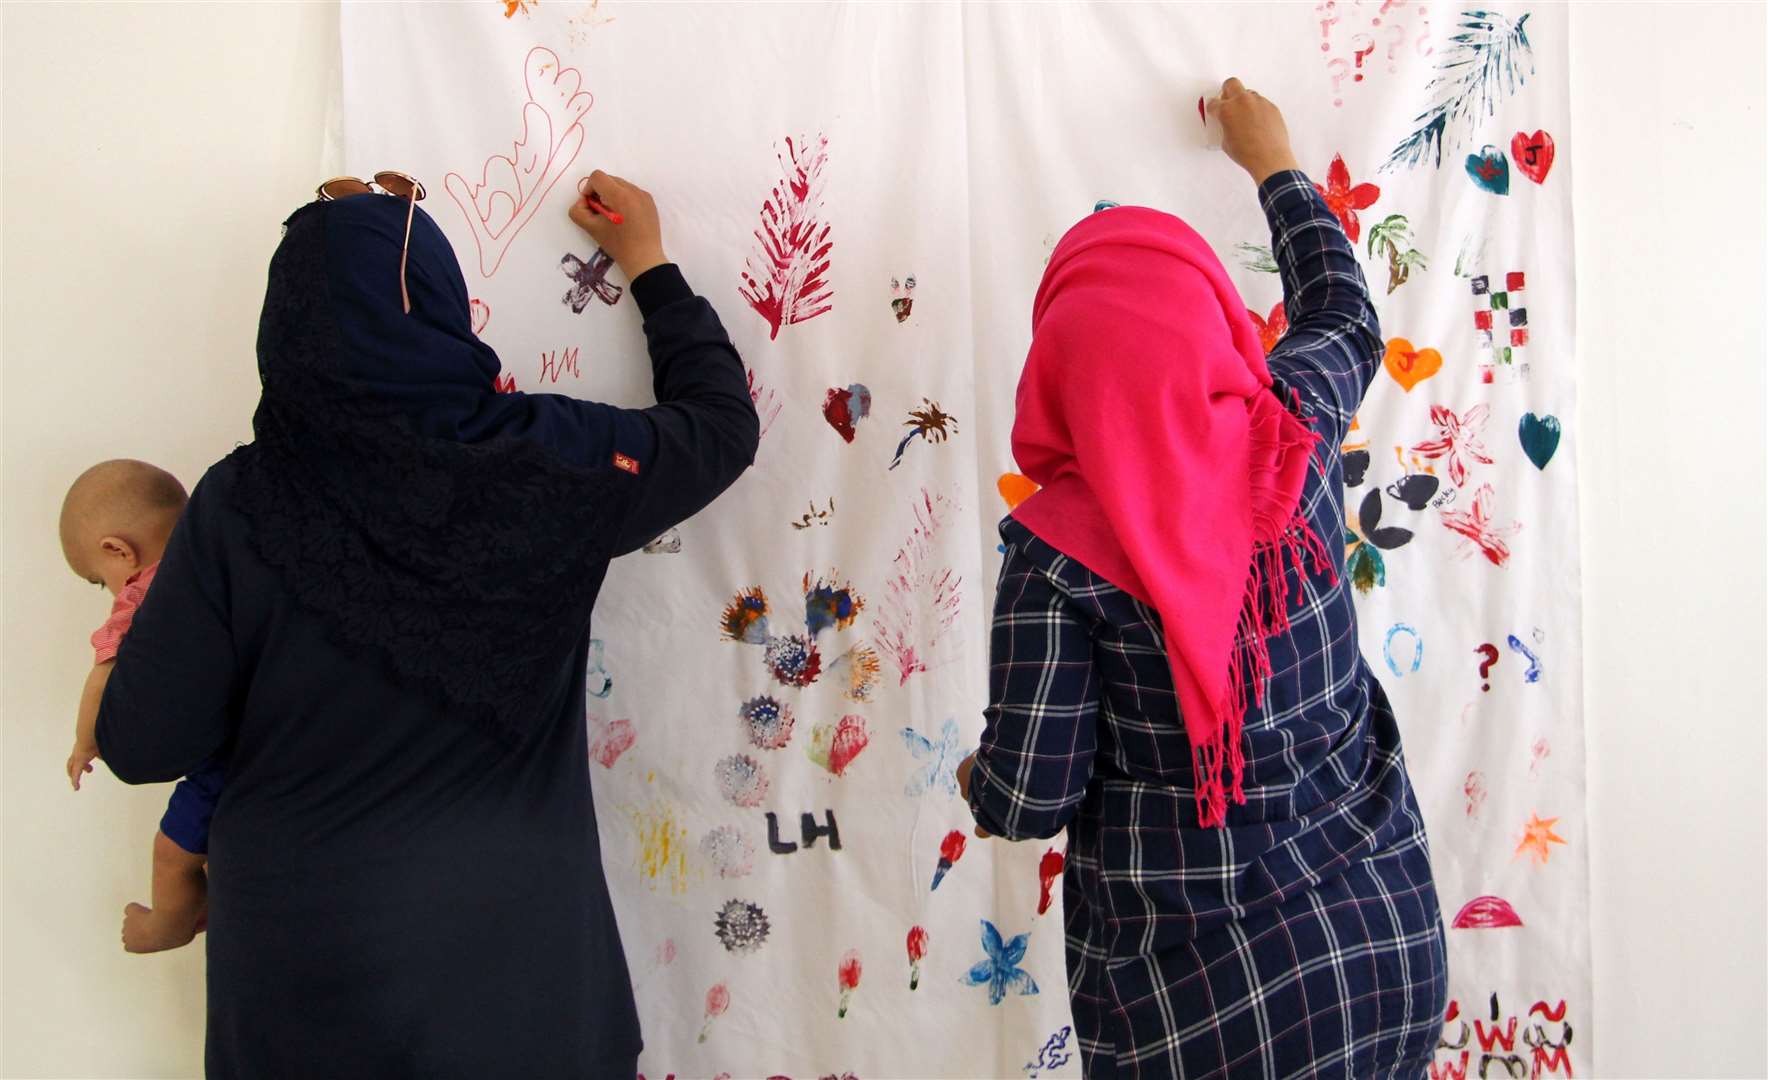 The sessions were a way of helping the Syrian women integrate into the wider community